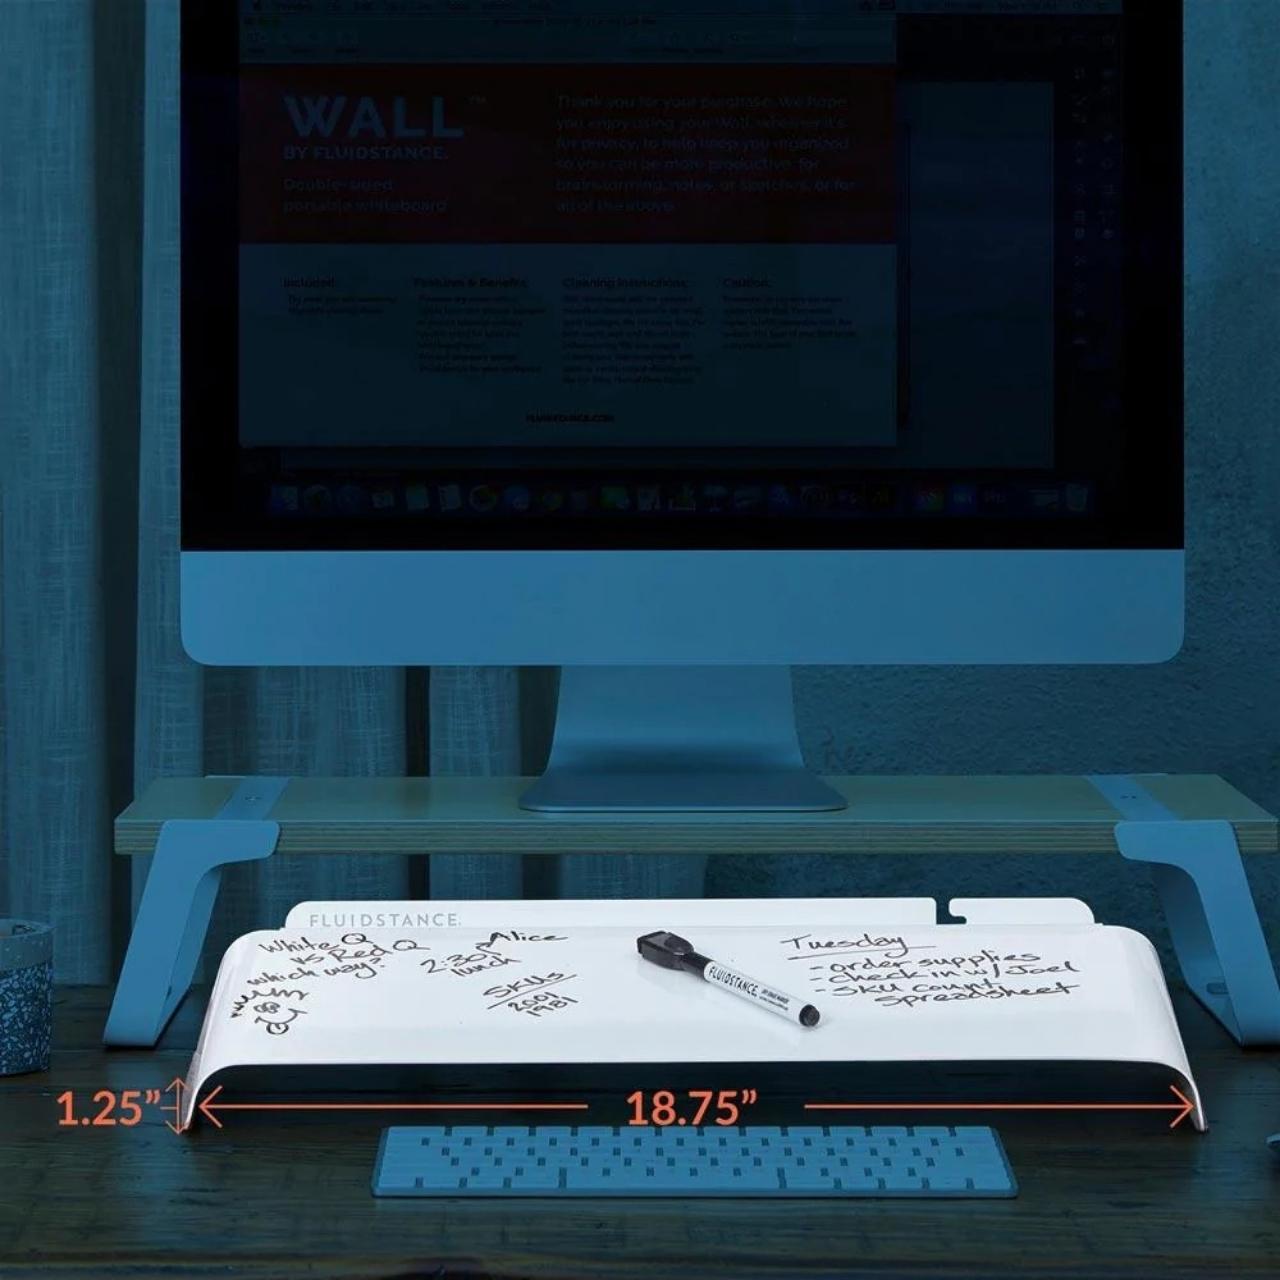 https://www.yankodesign.com/images/design_news/2022/09/slope-is-an-analog-writing-tool-in-between-your-monitor-and-keyboard/9.jpg